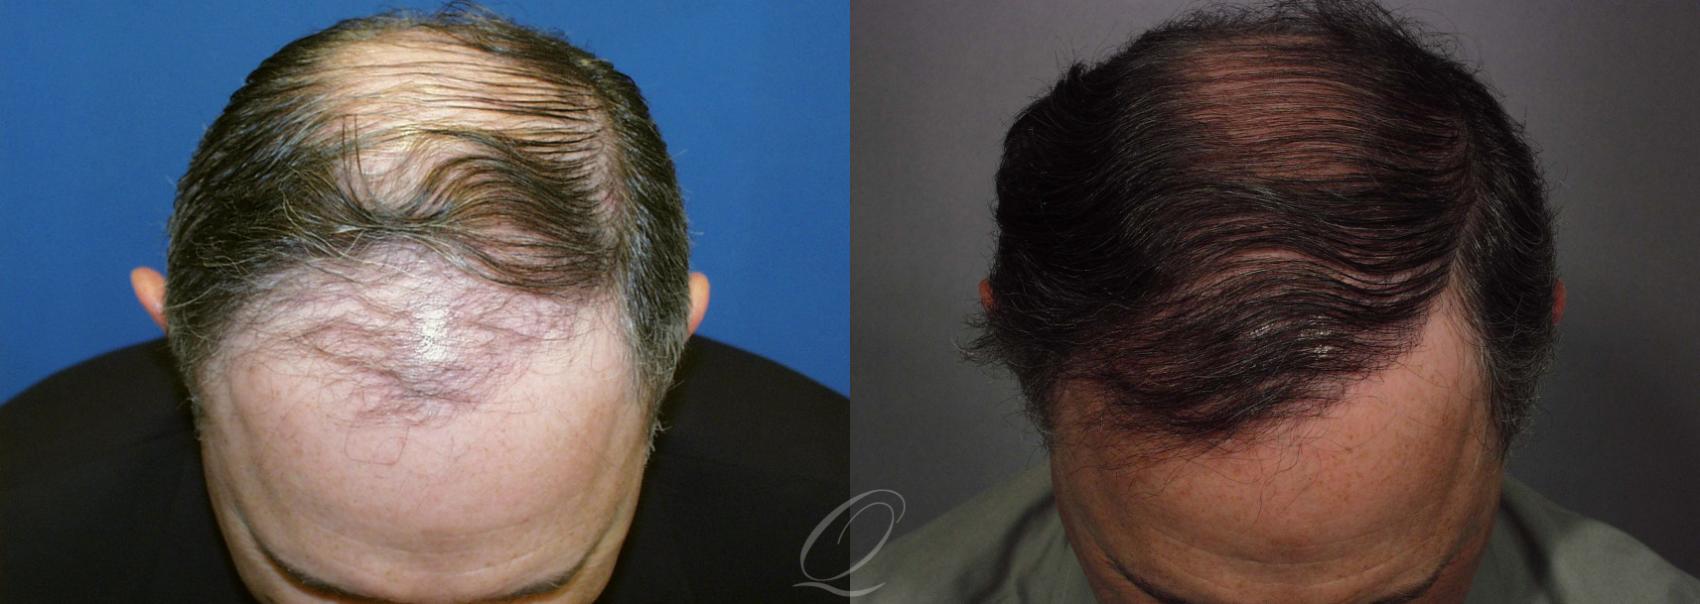 FUT Case 1039 Before & After View #1 | Rochester, Buffalo, & Syracuse, NY | Quatela Center for Hair Restoration